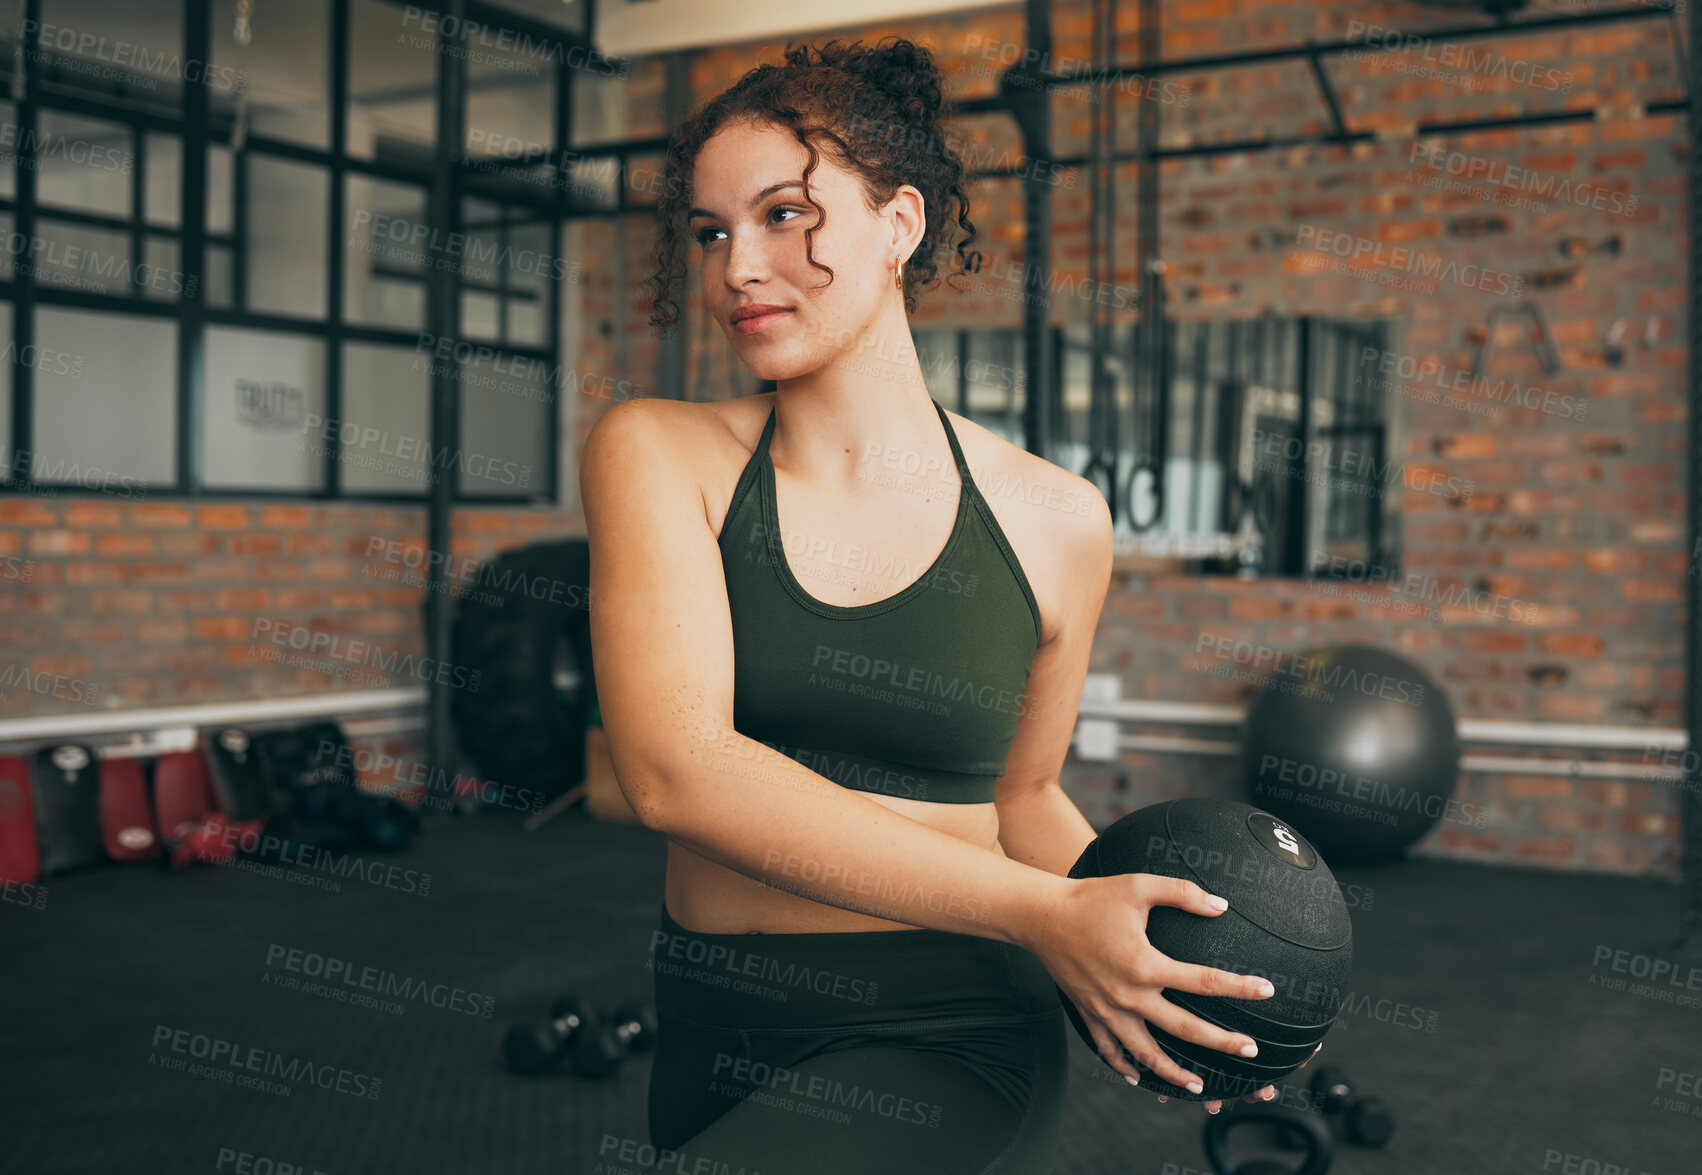 Buy stock photo Fitness, medicine ball and exercise of a woman at gym doing weight training for body wellness, health and energy. Sports female with equipment for strong muscle power, balance and healthy lifestyle